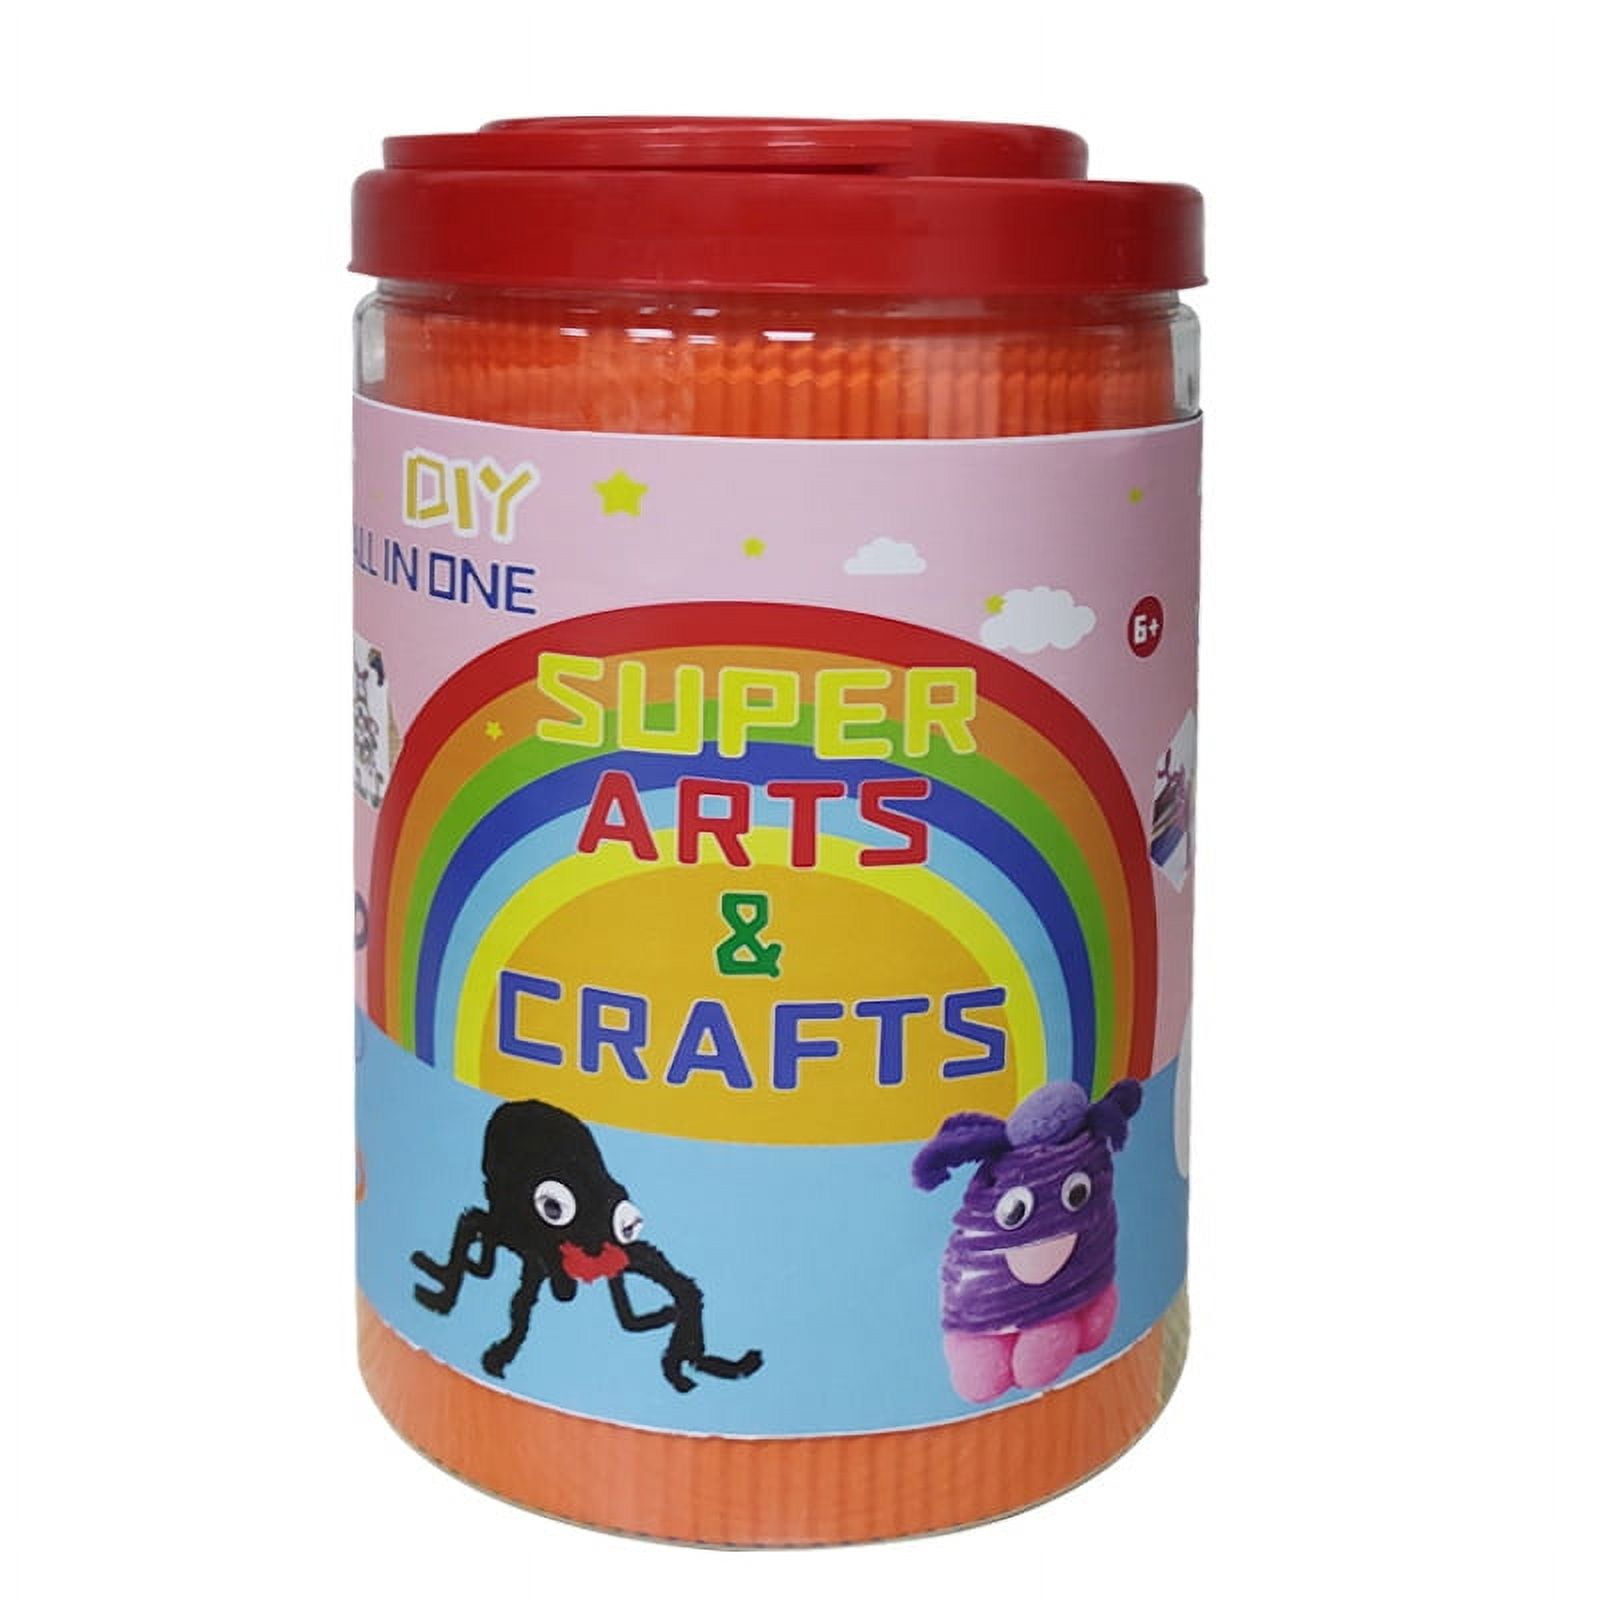 Bb Bachmore Mega Kids Art Supplies Jar – Over 700 Pieces of Colorful and Creative Arts and Crafts Materials - Glue, Safety Scissors, Pompoms, Popsicle